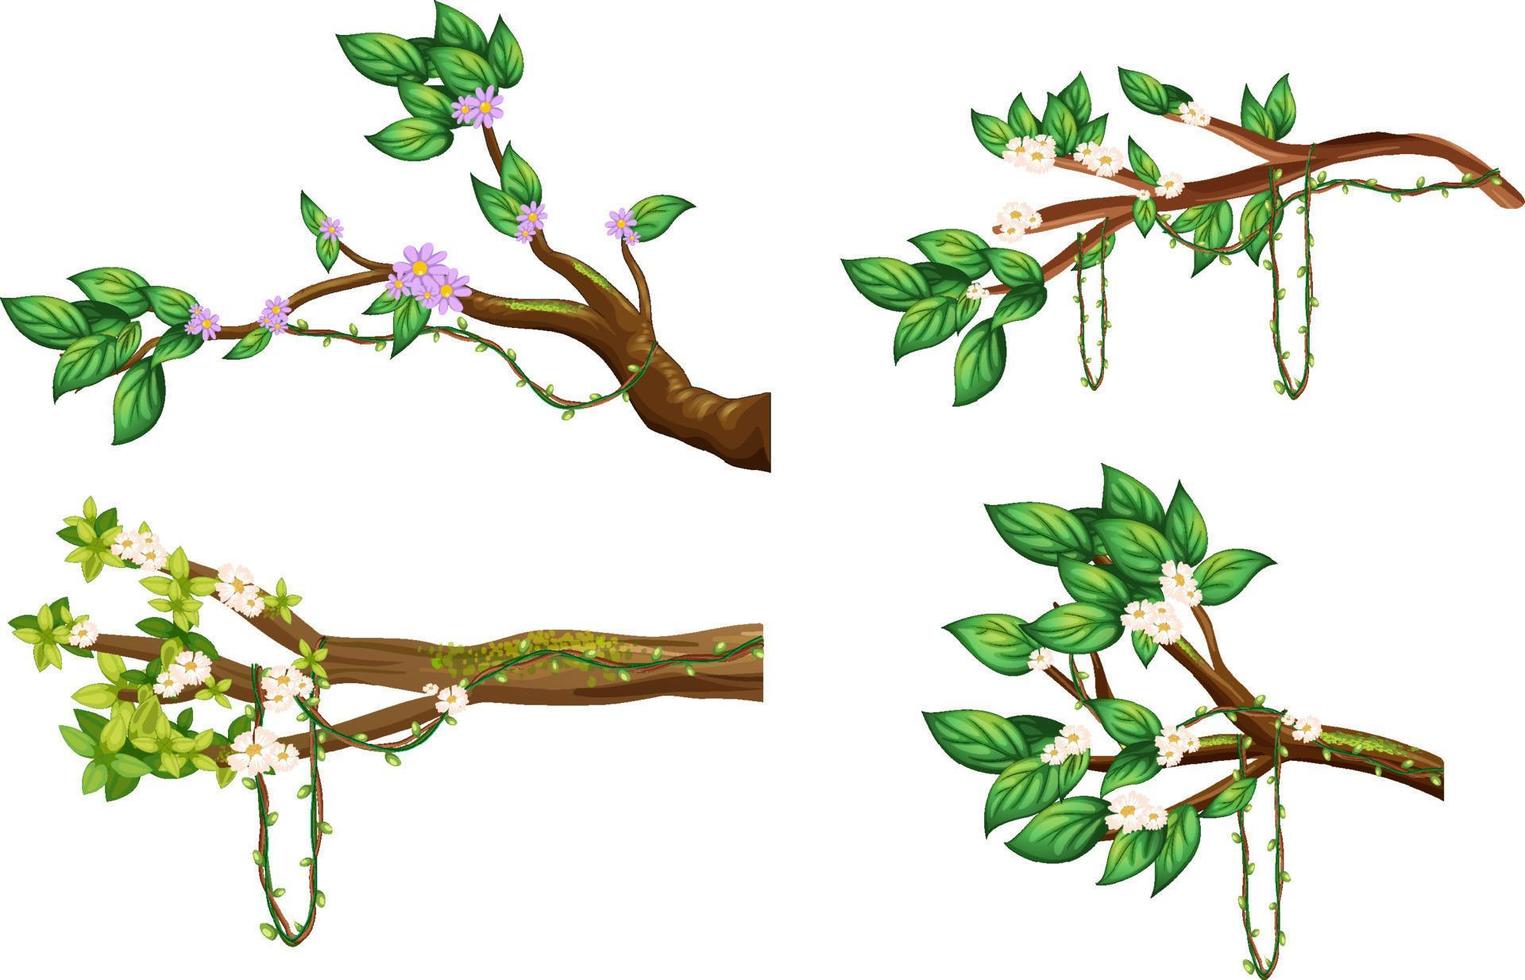 Cherry blossom branch isolated vector